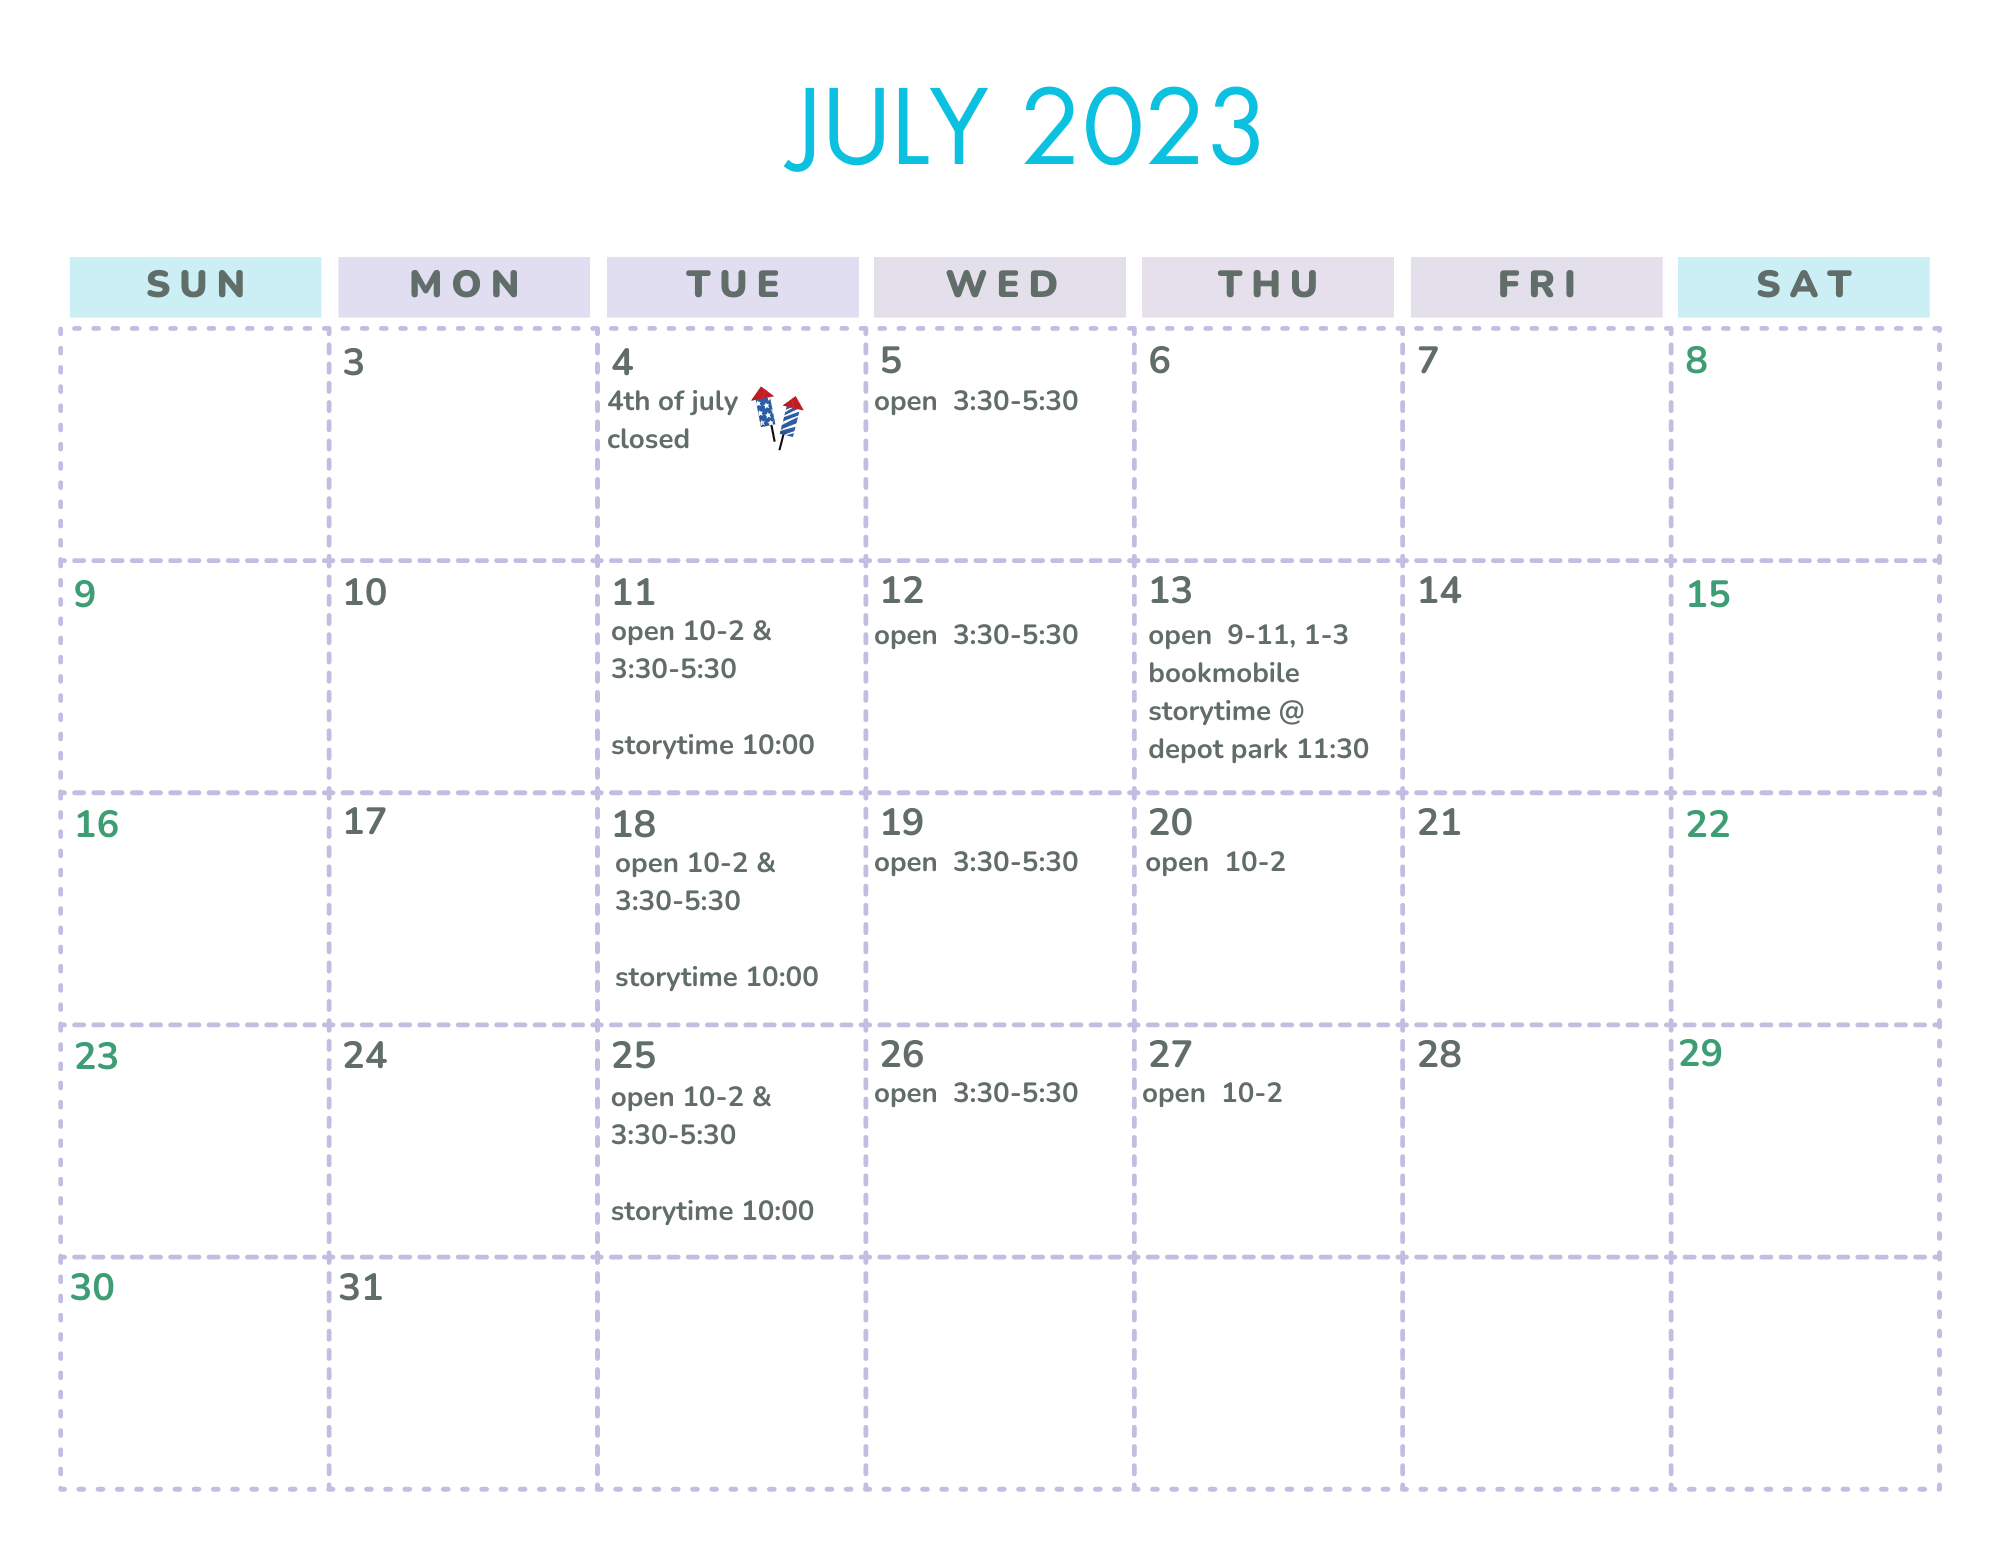 july 2023 calendar showing open library dates